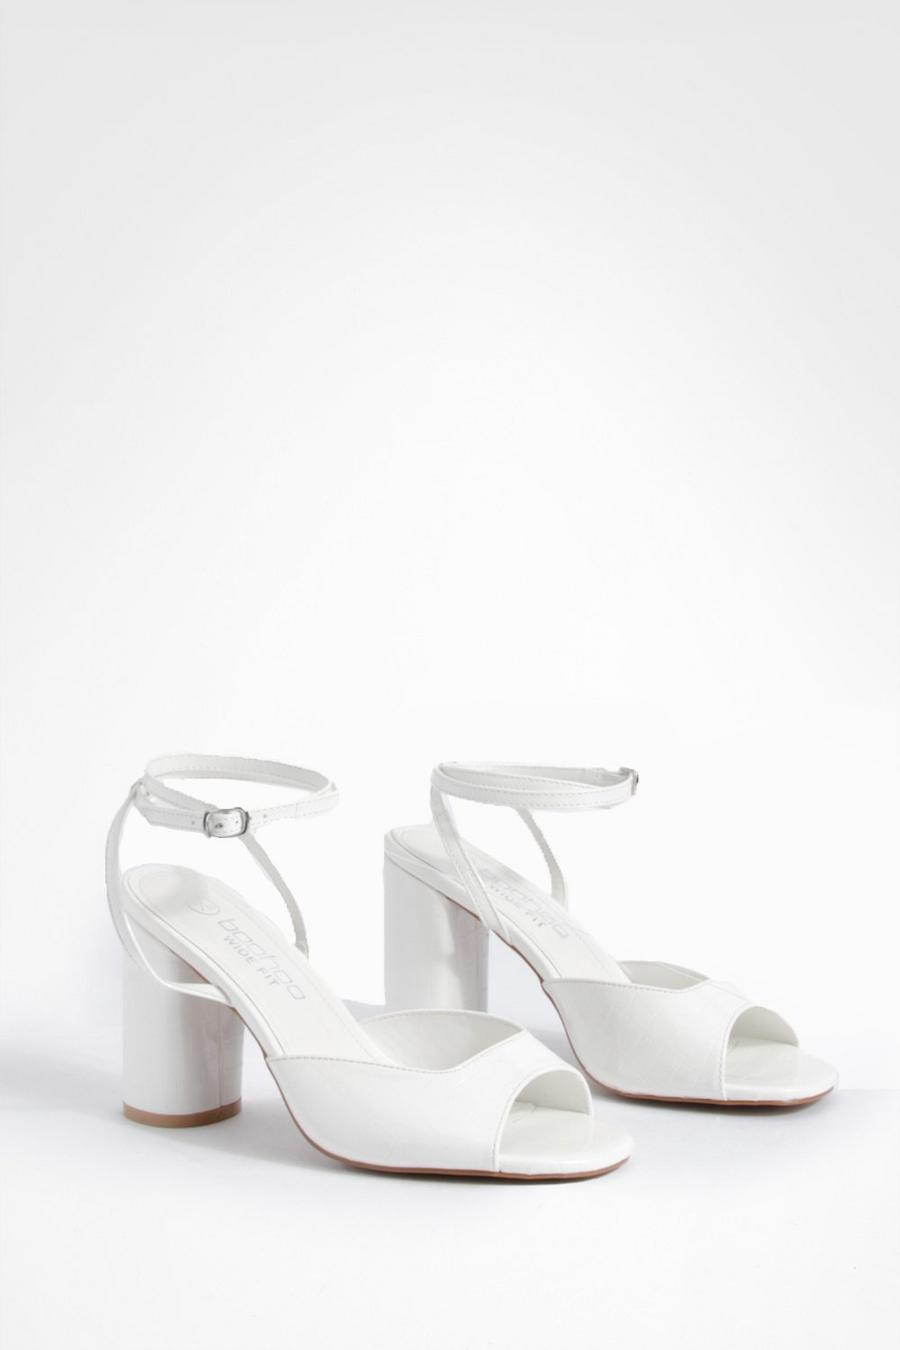 White Wide Width Croc Rounded Heel Strappy Barely There Heels